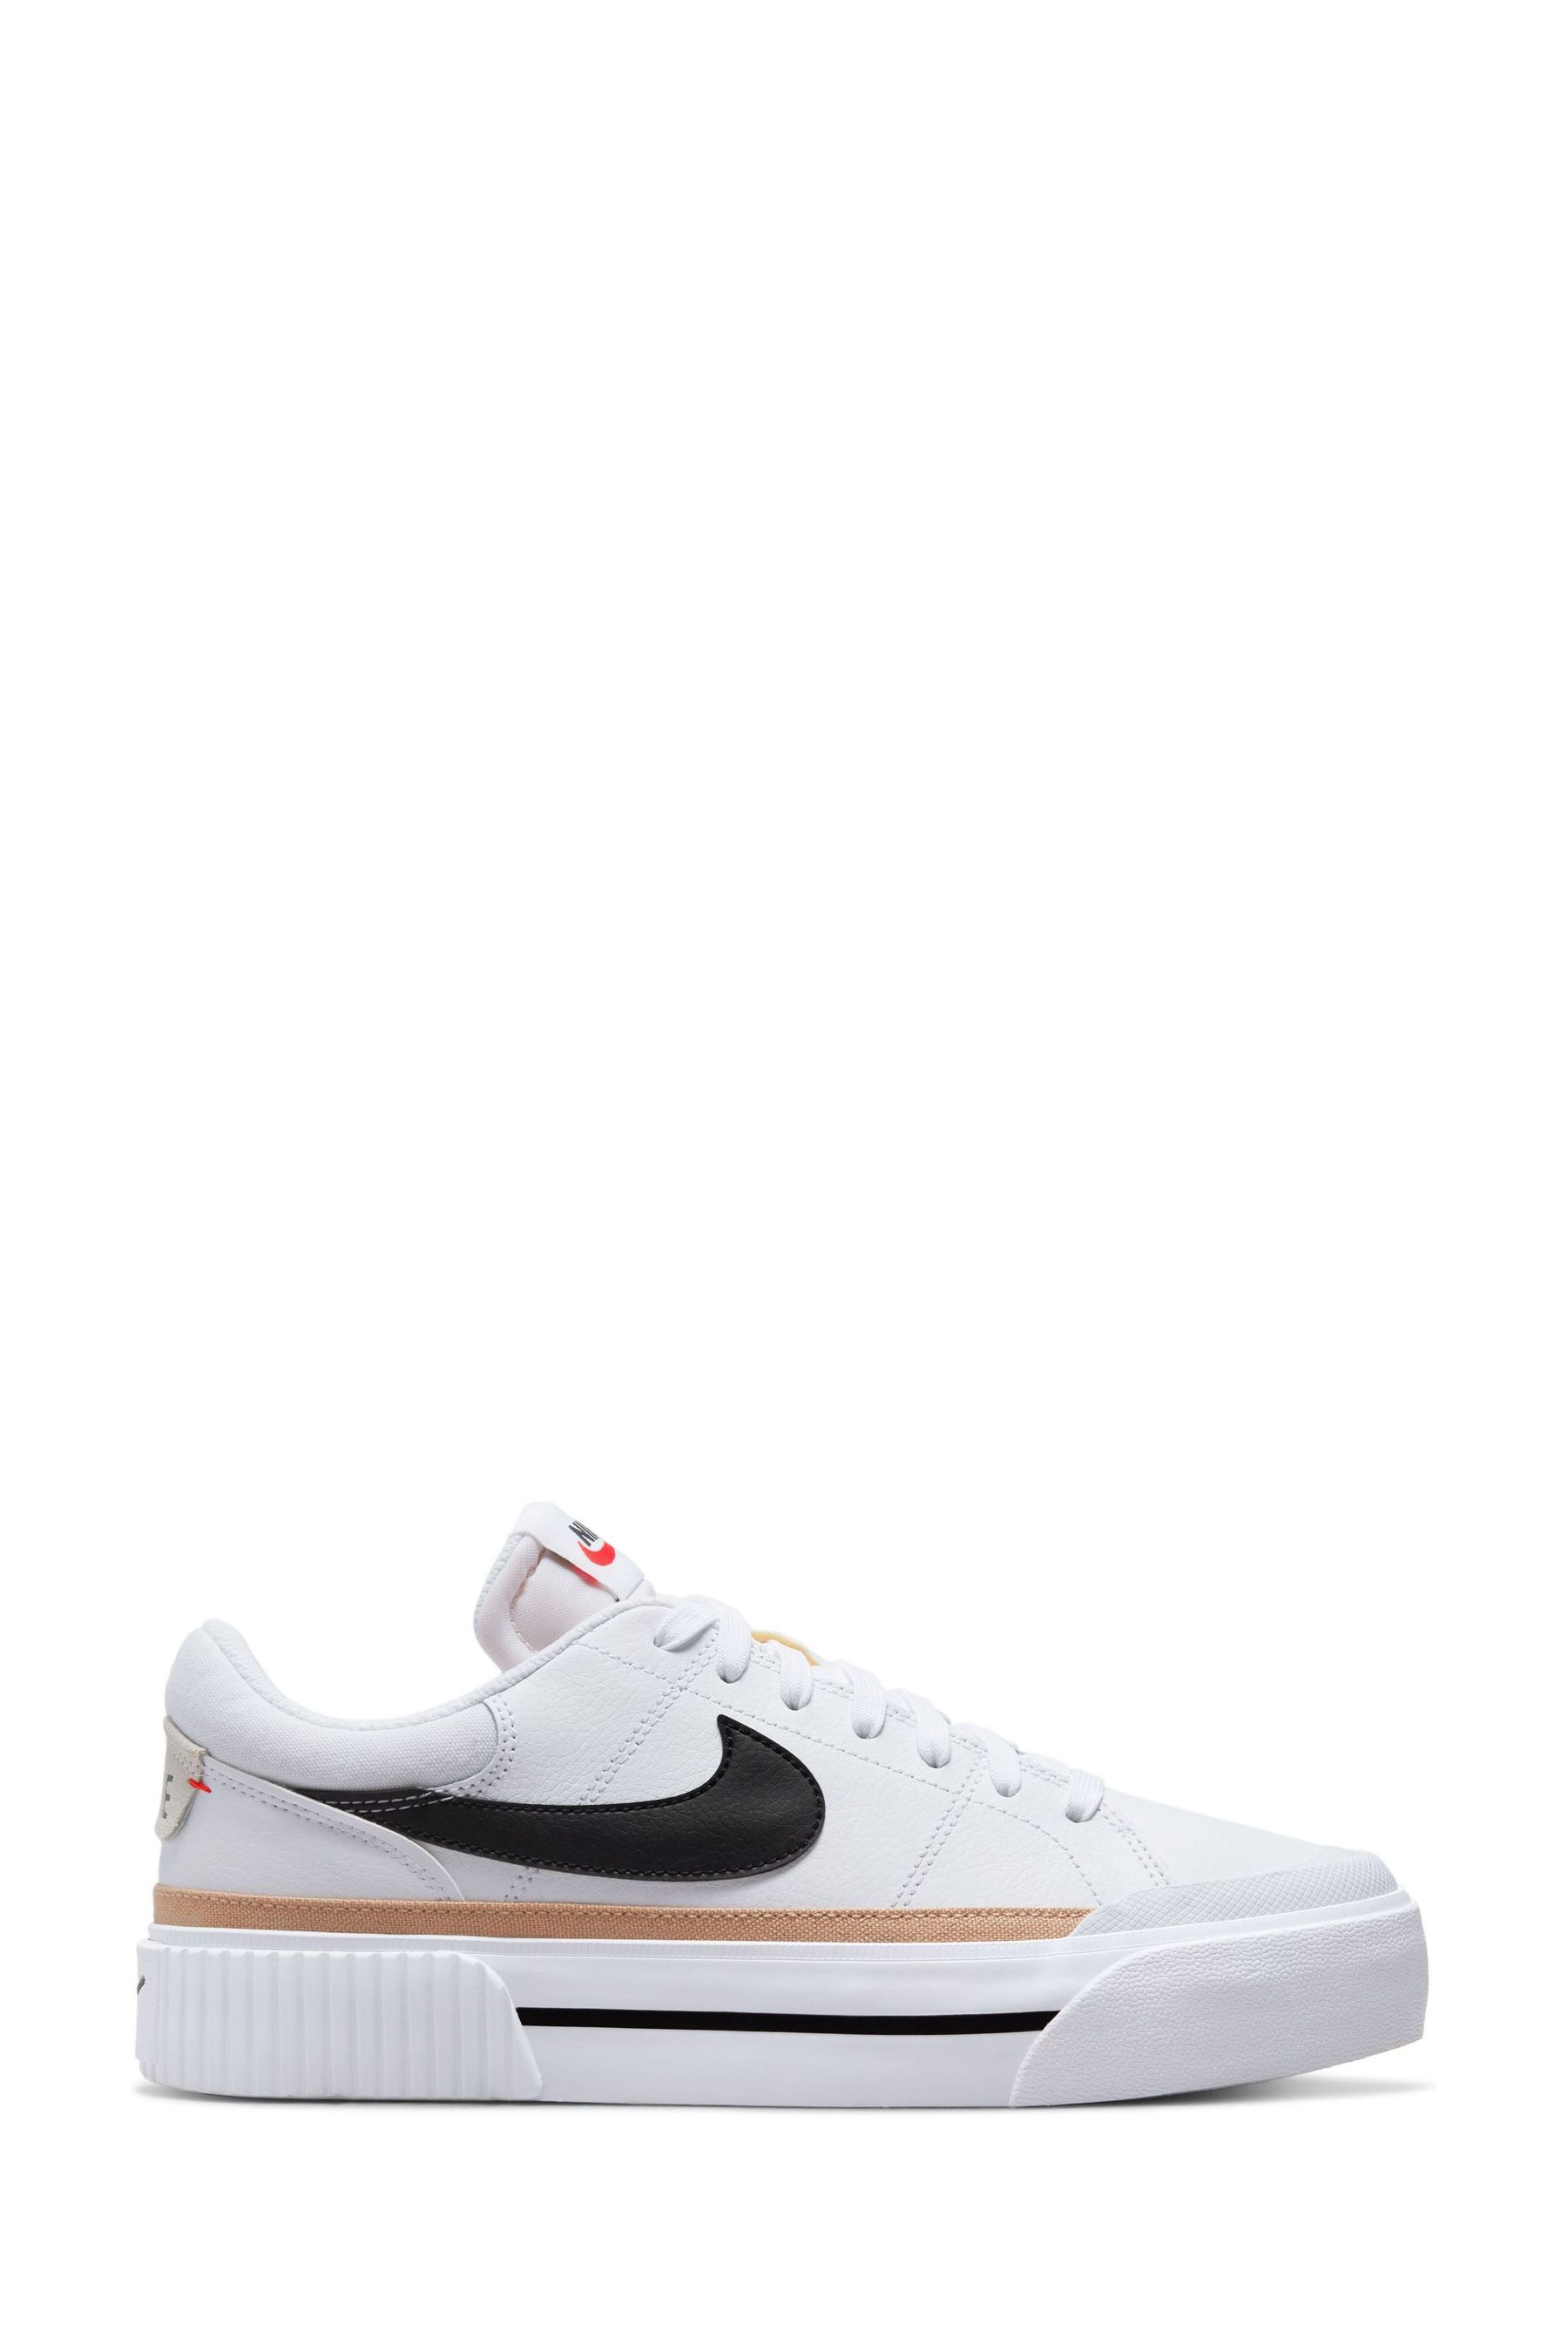 Buy Nike Court Legacy Lift Platform Trainers from the Next UK online shop